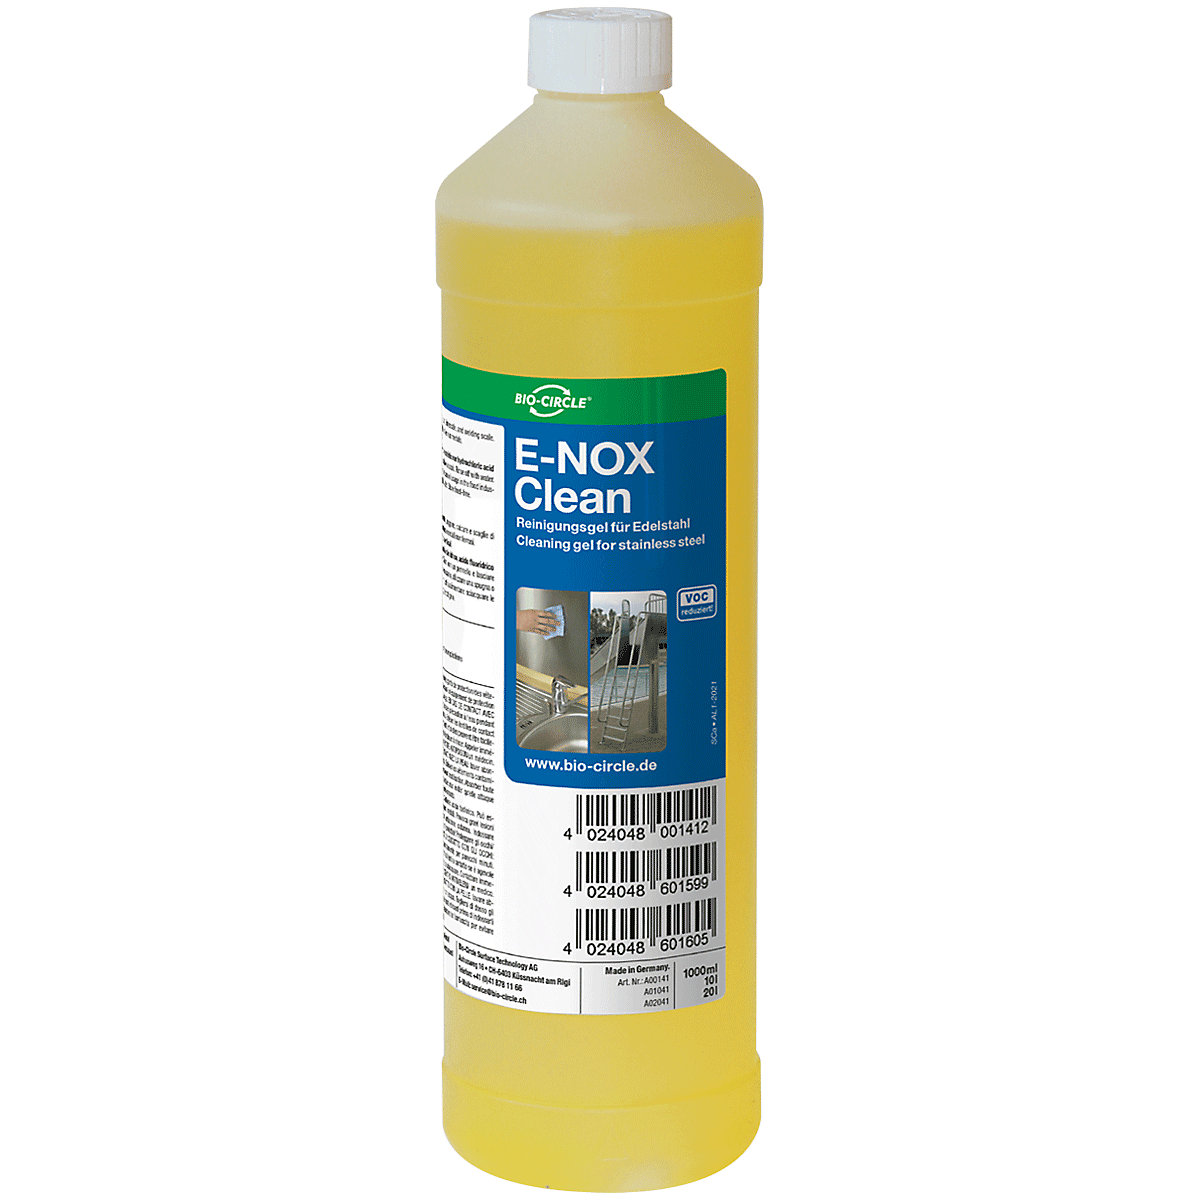 E-NOX Clean limescale and rust cleaner - Bio-Circle